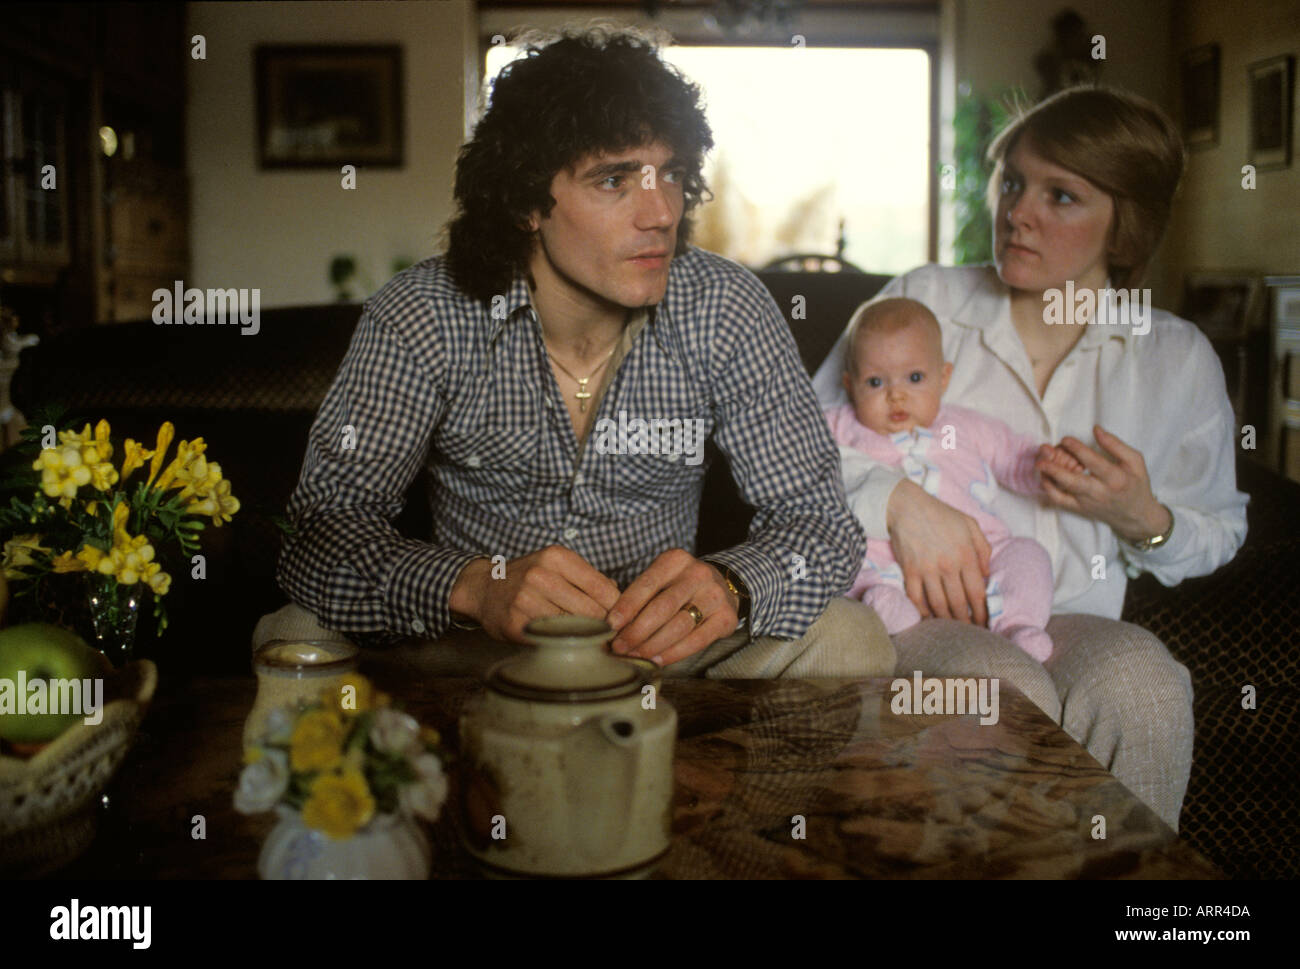 Kevin Keegan with wife Jean and baby in their home Hamburg Germany circa 1975 HOMER SYKES Stock Photo